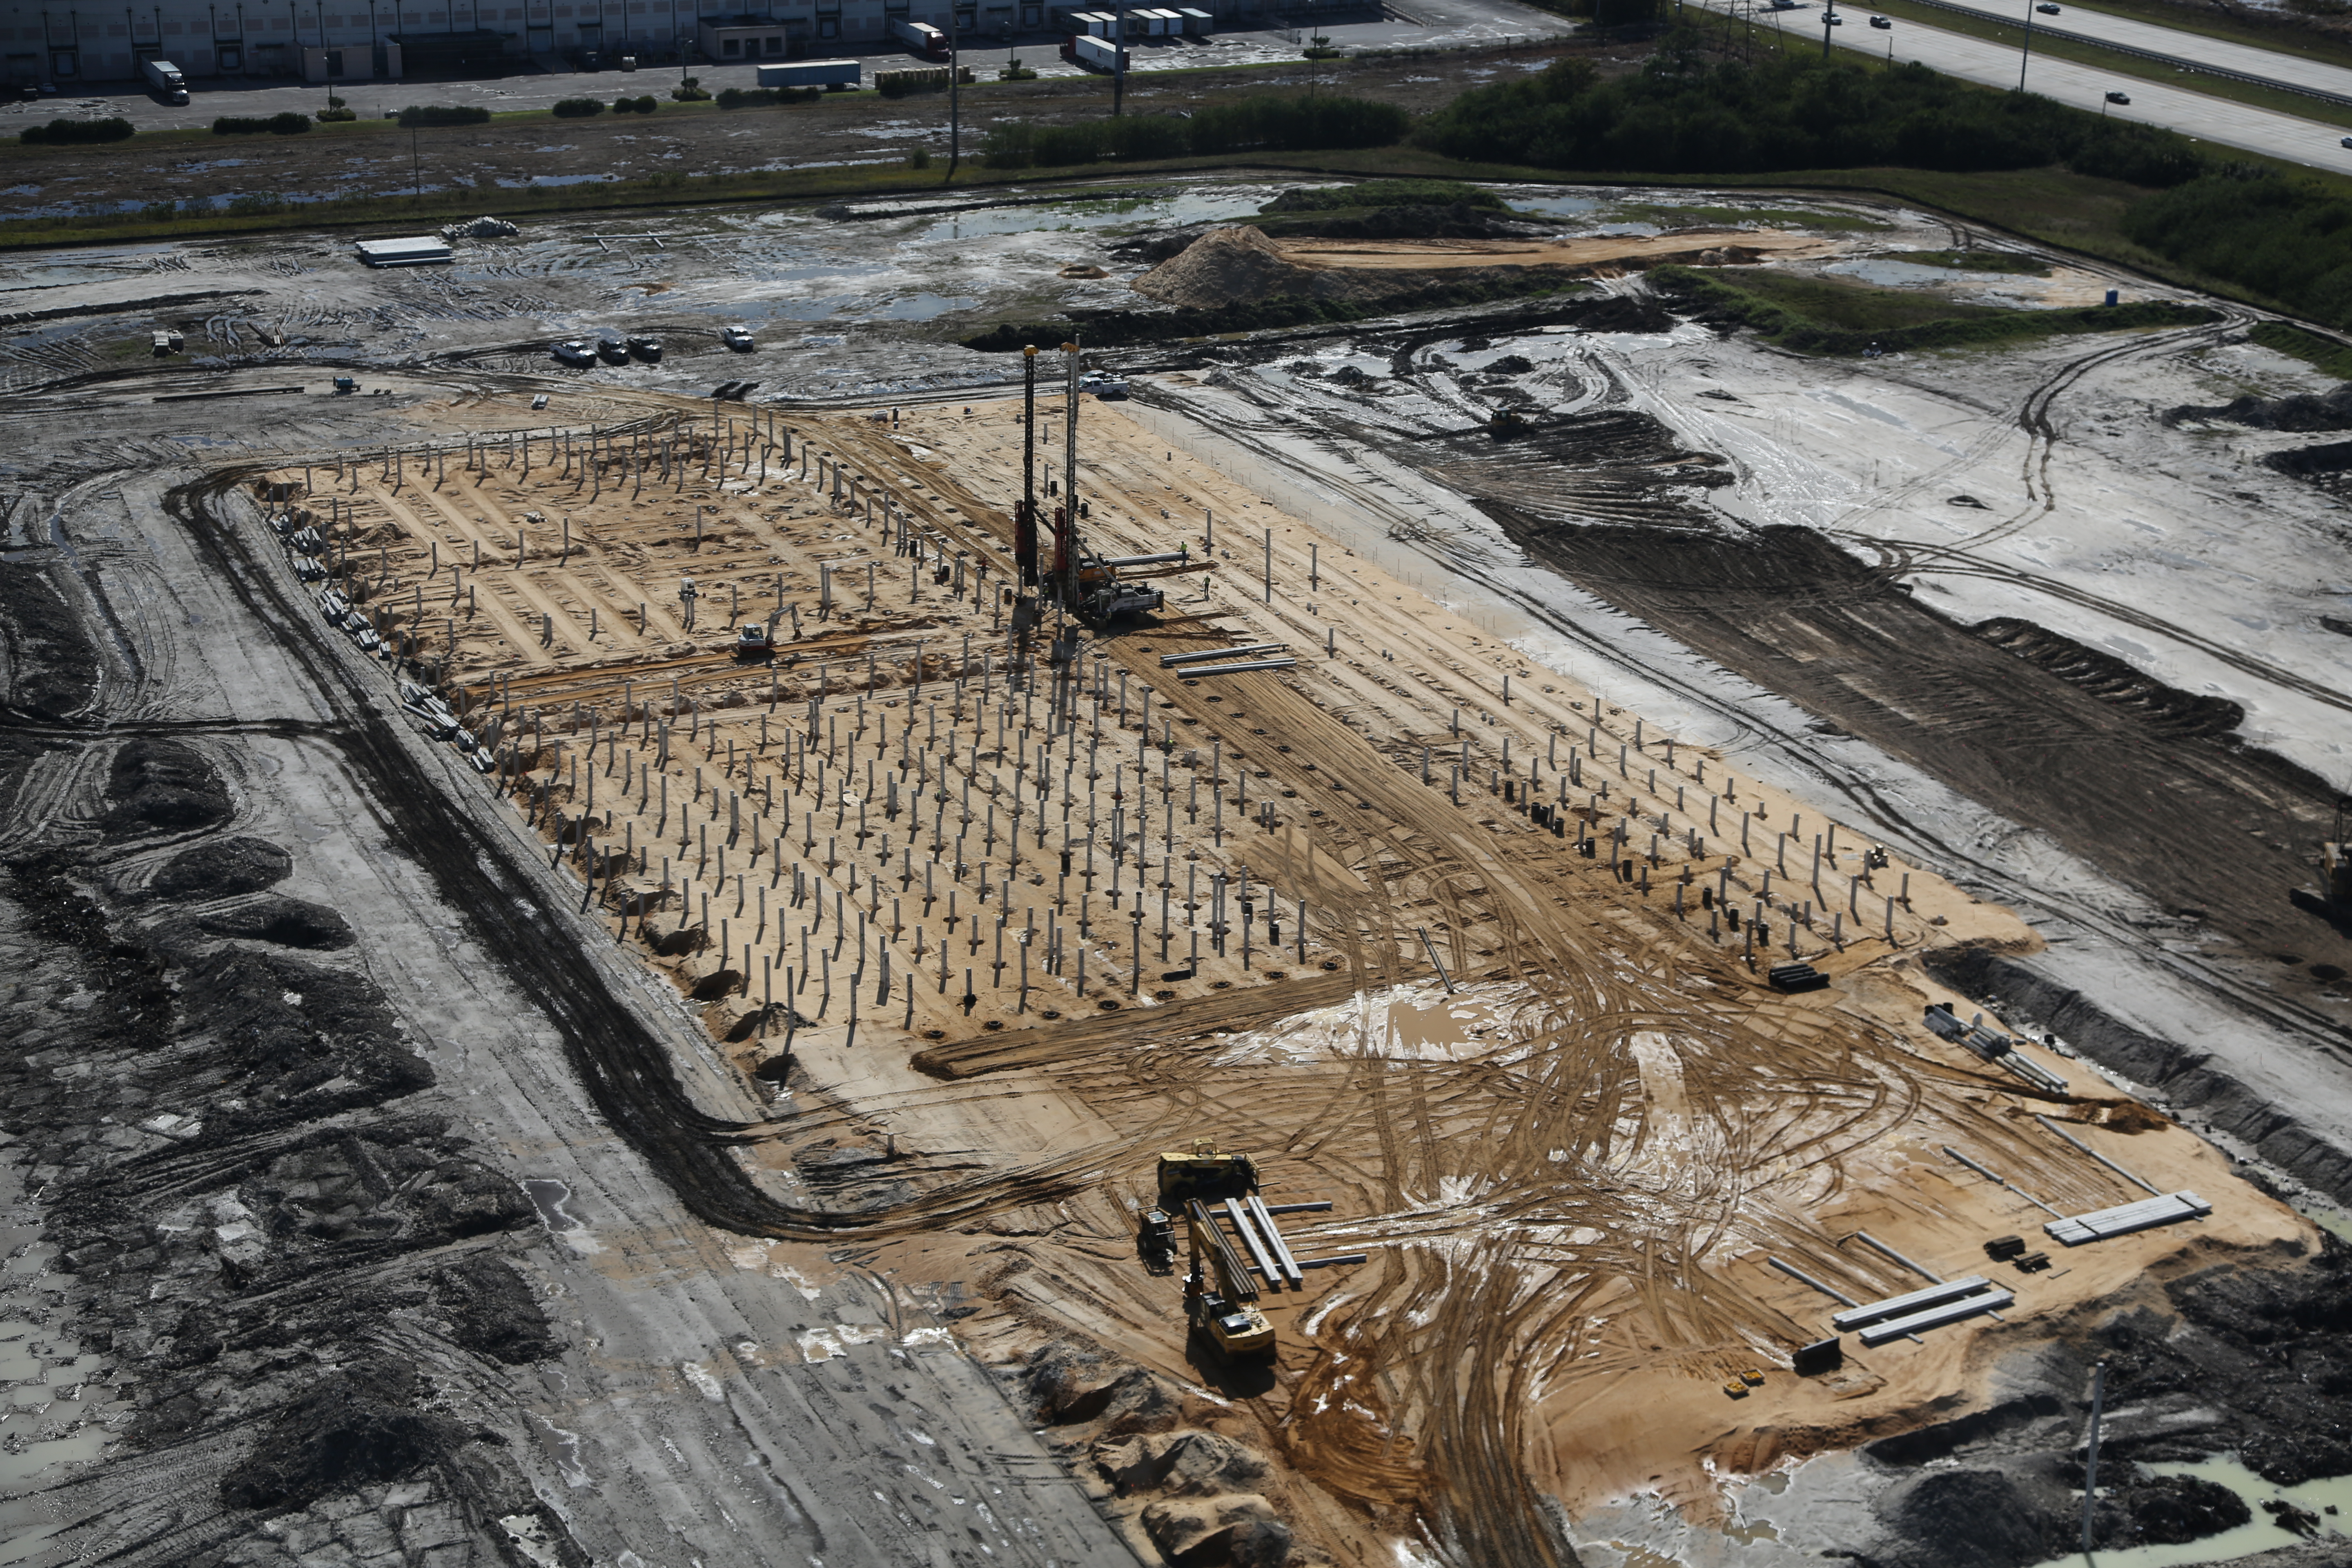 Approximately 1700, 12" piles, 75 tons Leimet spliced piles driven in a previous construction dump site. Pilot holes were spudded to clear path for production piles. Job site location: Saint Petersburg, Florida